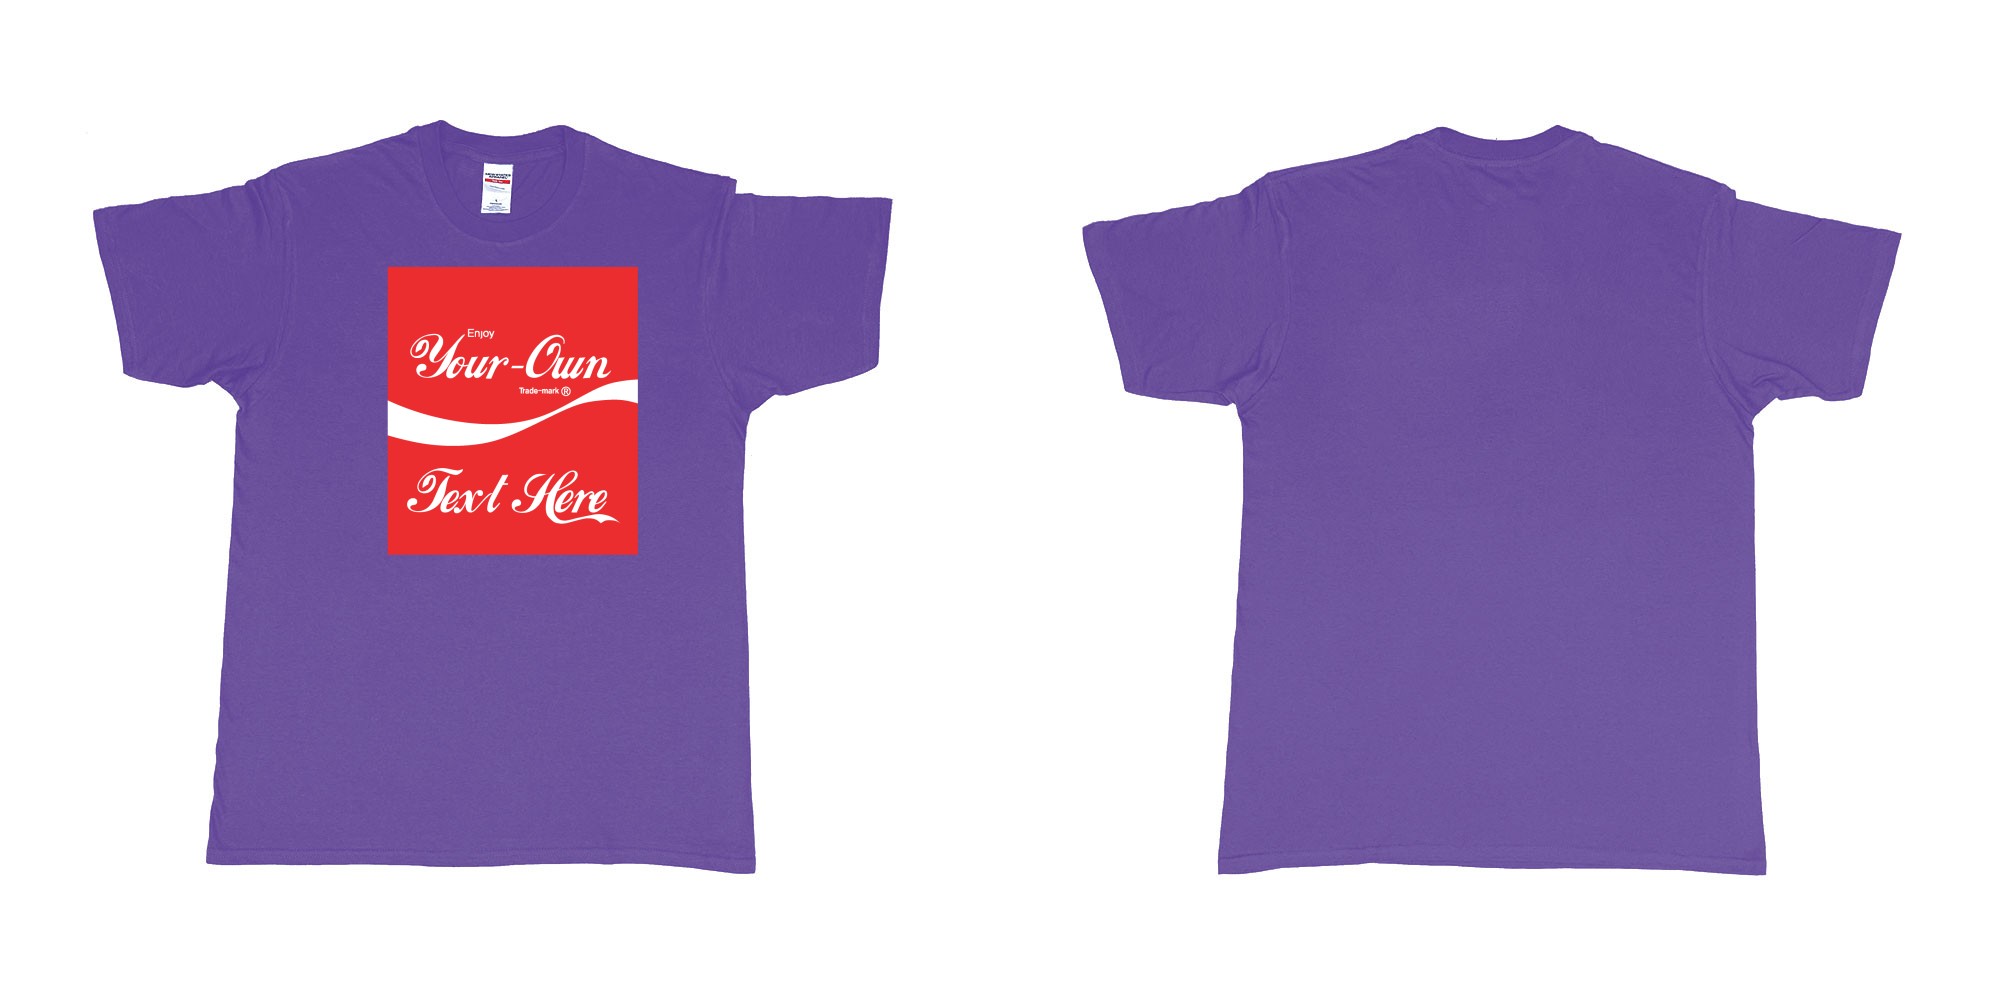 Custom tshirt design Coca Cola in fabric color purple choice your own text made in Bali by The Pirate Way